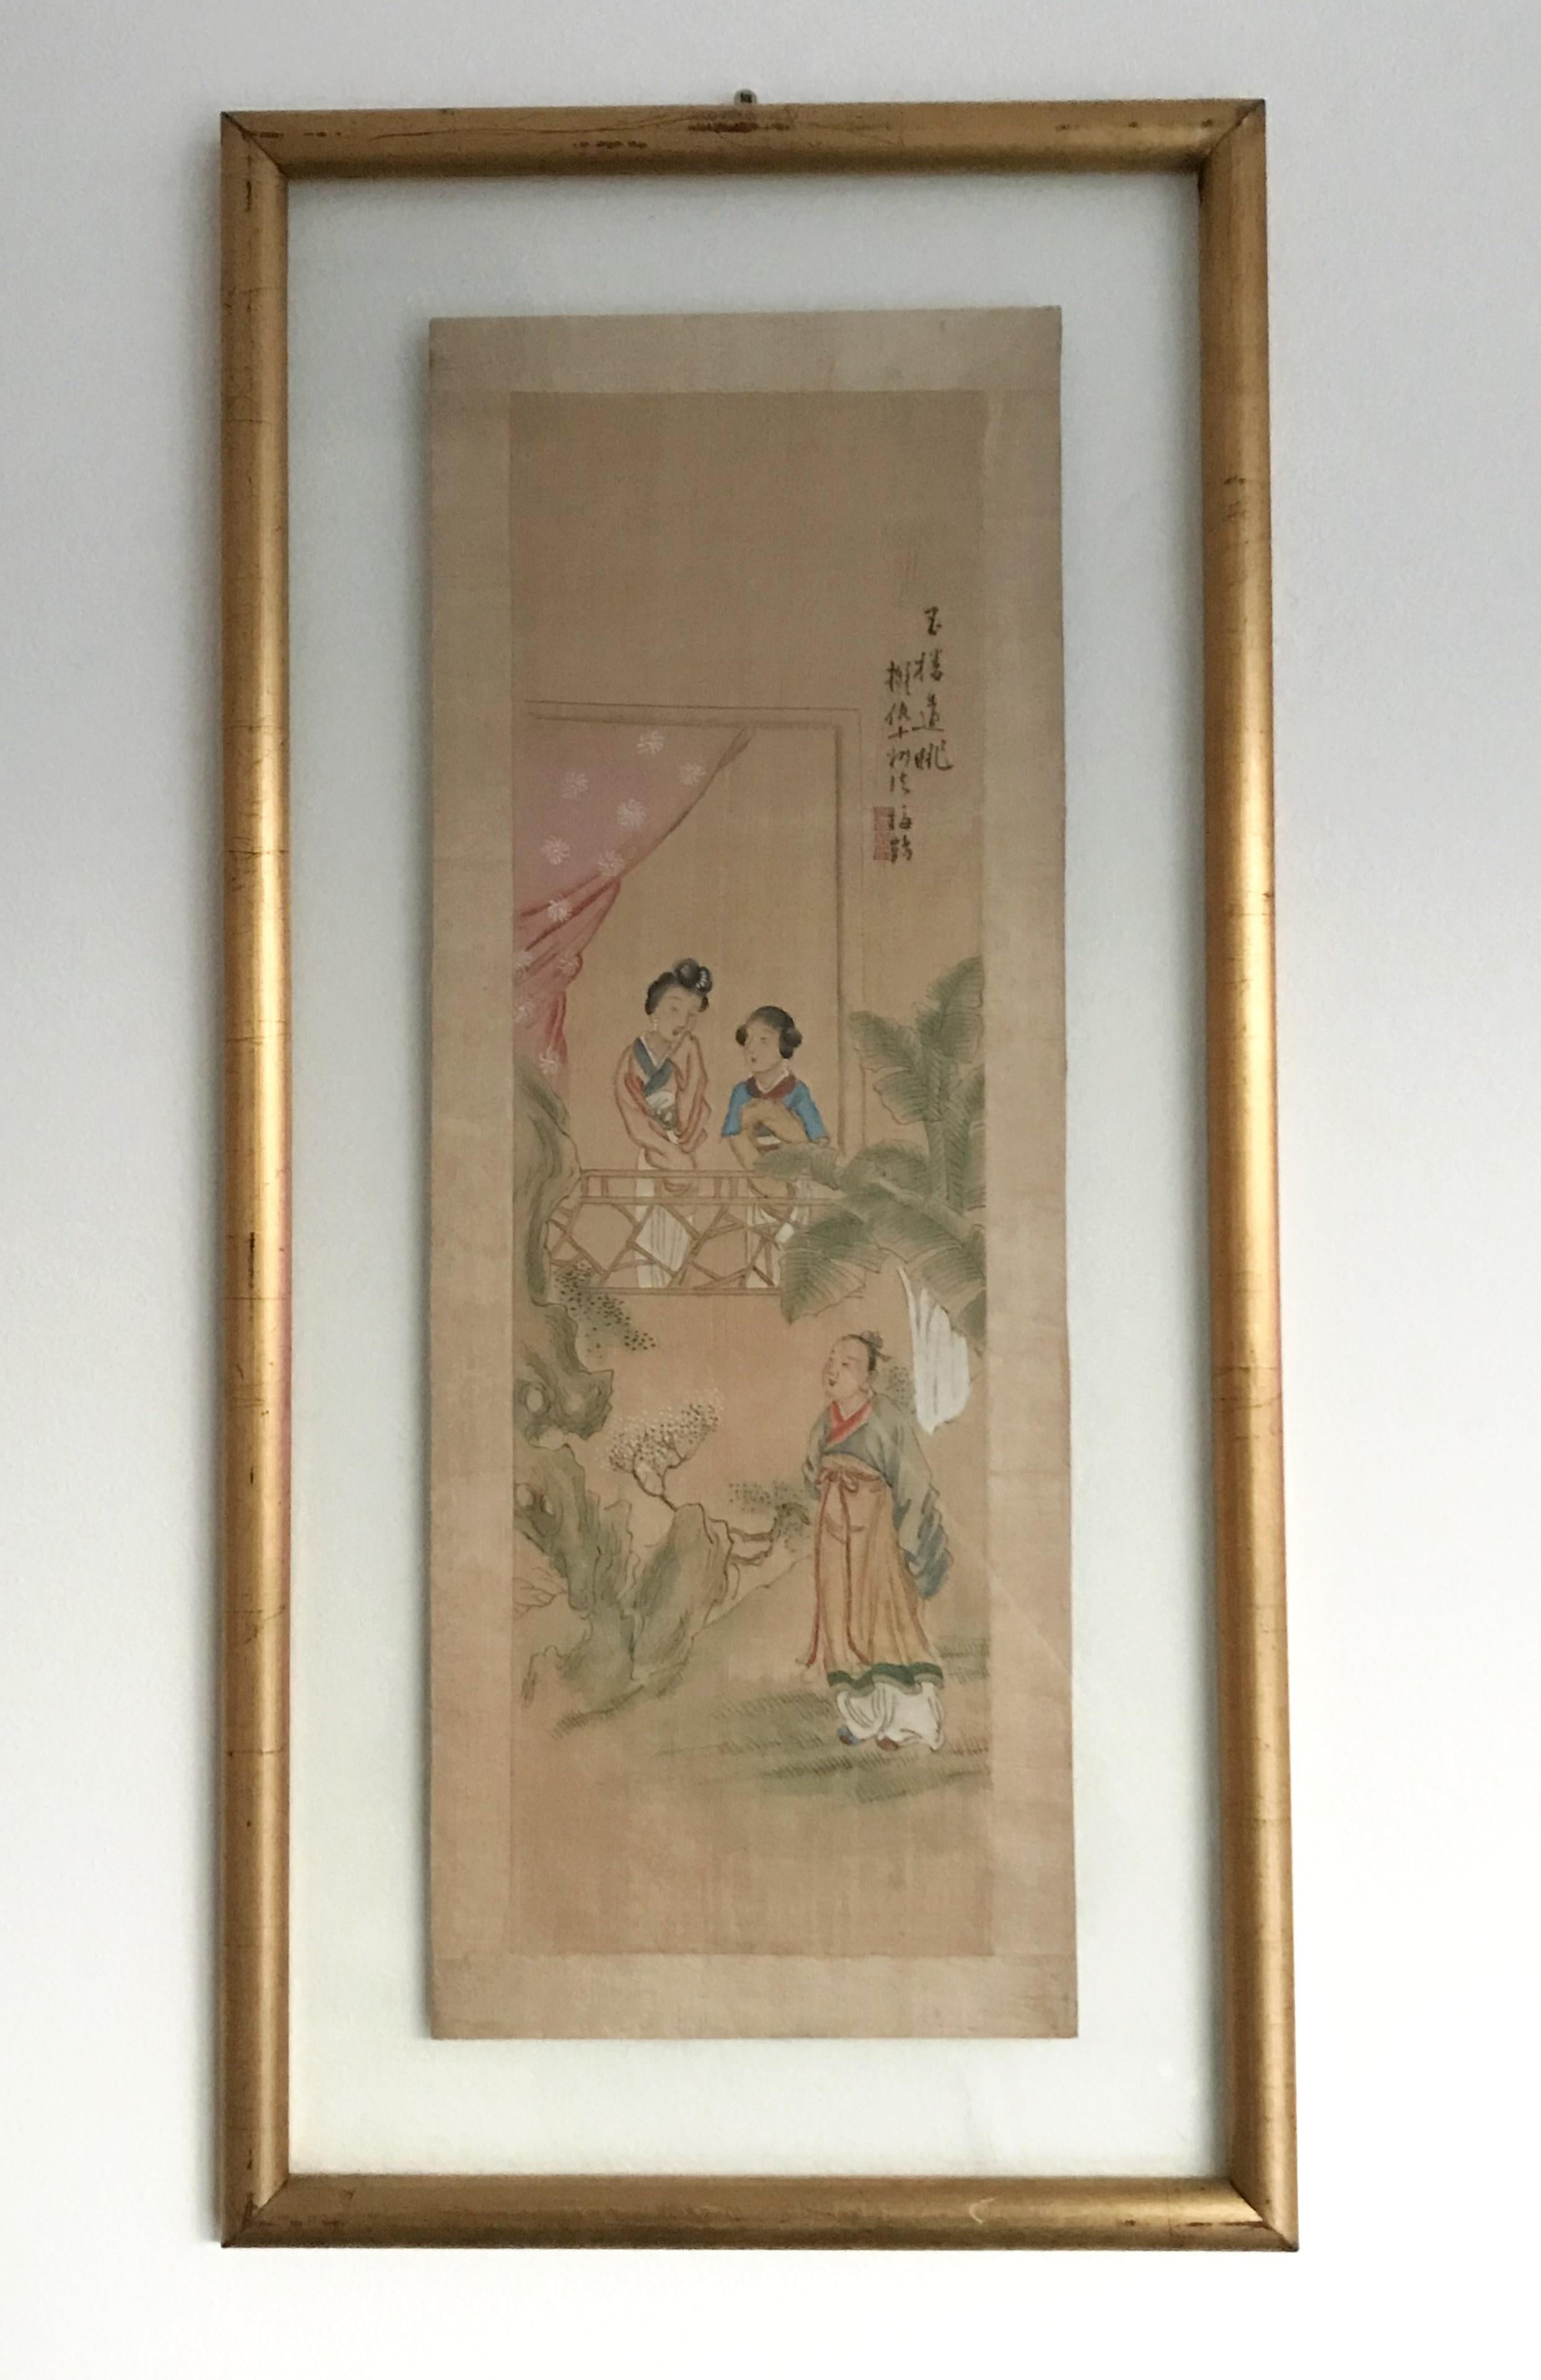 Antique Chinese watercolor painting on paper, enclosed in glass and gilt wood frame, early 20th century.
Measures: height 27.5 inches, width 13.5 inches, depth 0.75 inches
1 in stock in Los Angeles
Order reference #: FABIOLTD F229